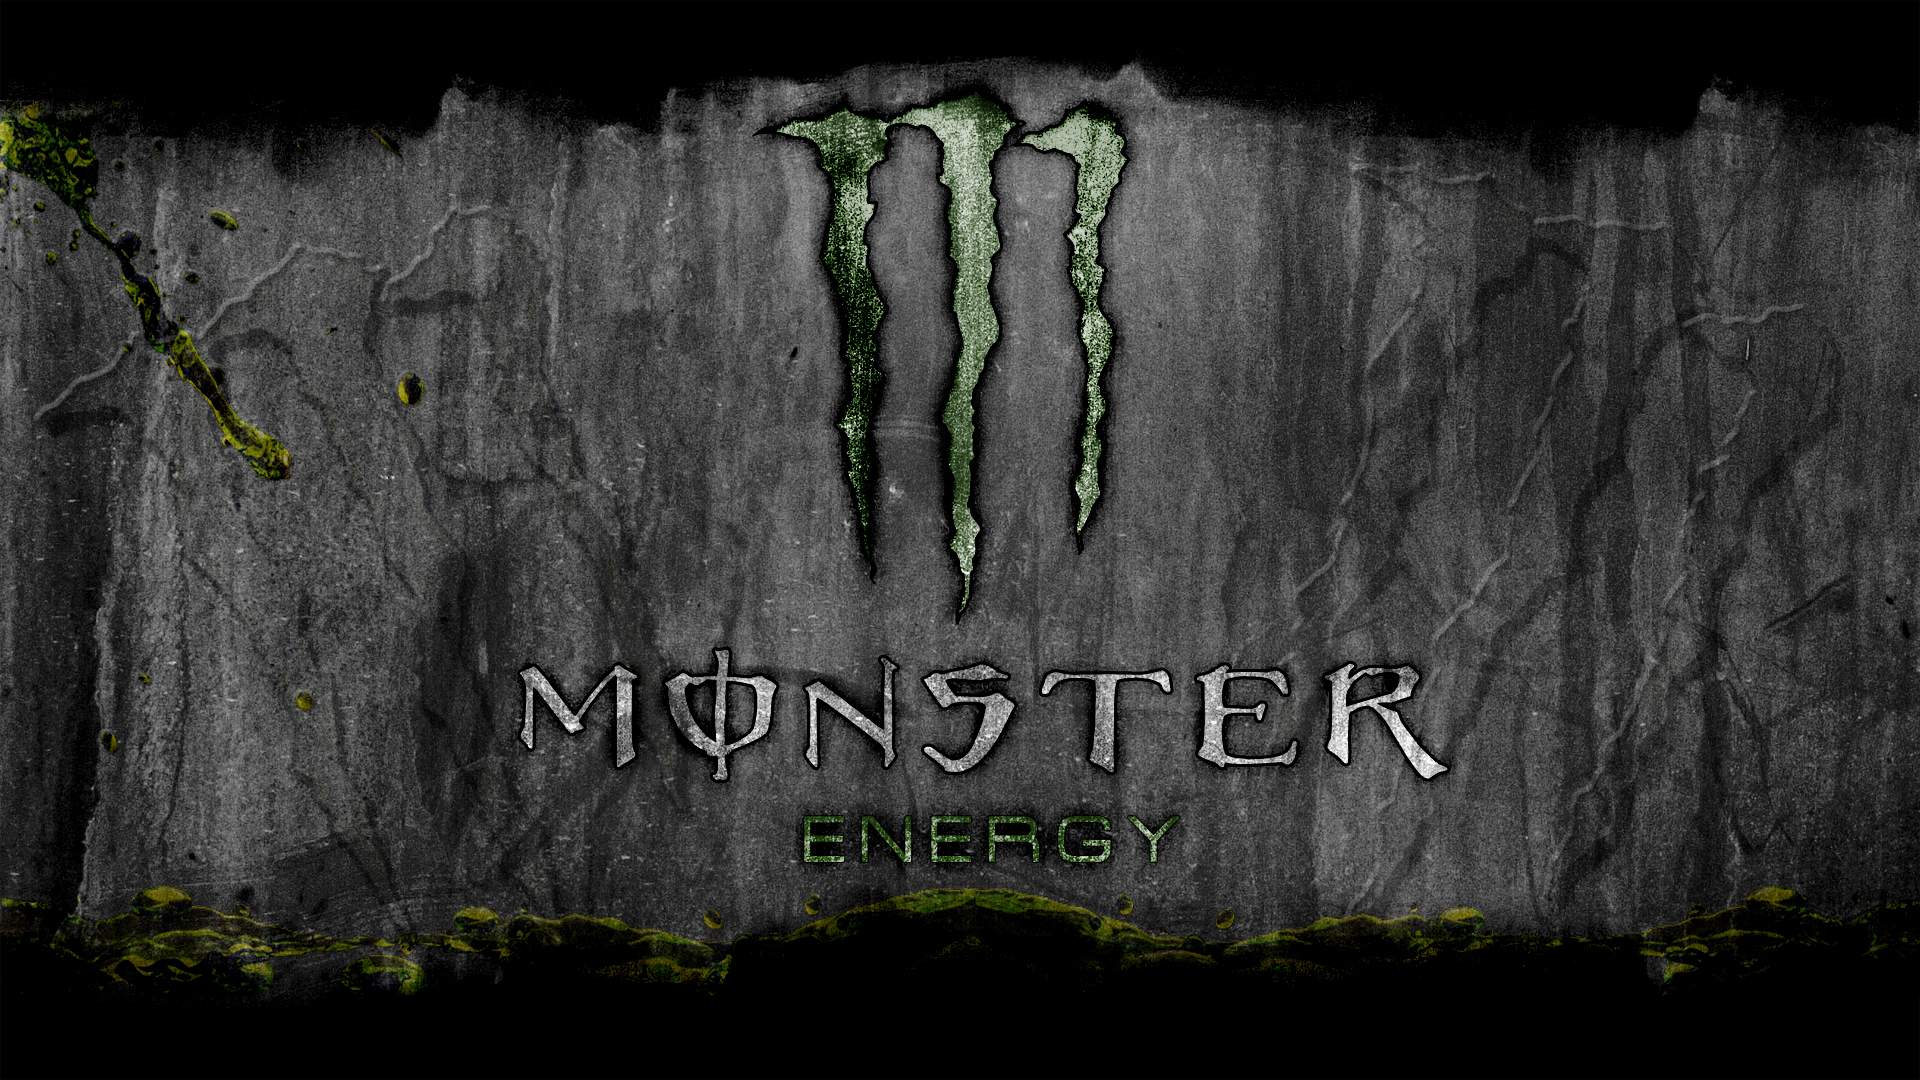 Free Download Fotos Monster Energy Drink Chevrolet Wallpaper With 19x1080 For Your Desktop Mobile Tablet Explore 74 Monster Energy Logo Wallpaper Monster Logos Wallpaper Monster Energy Girls Wallpaper Blue